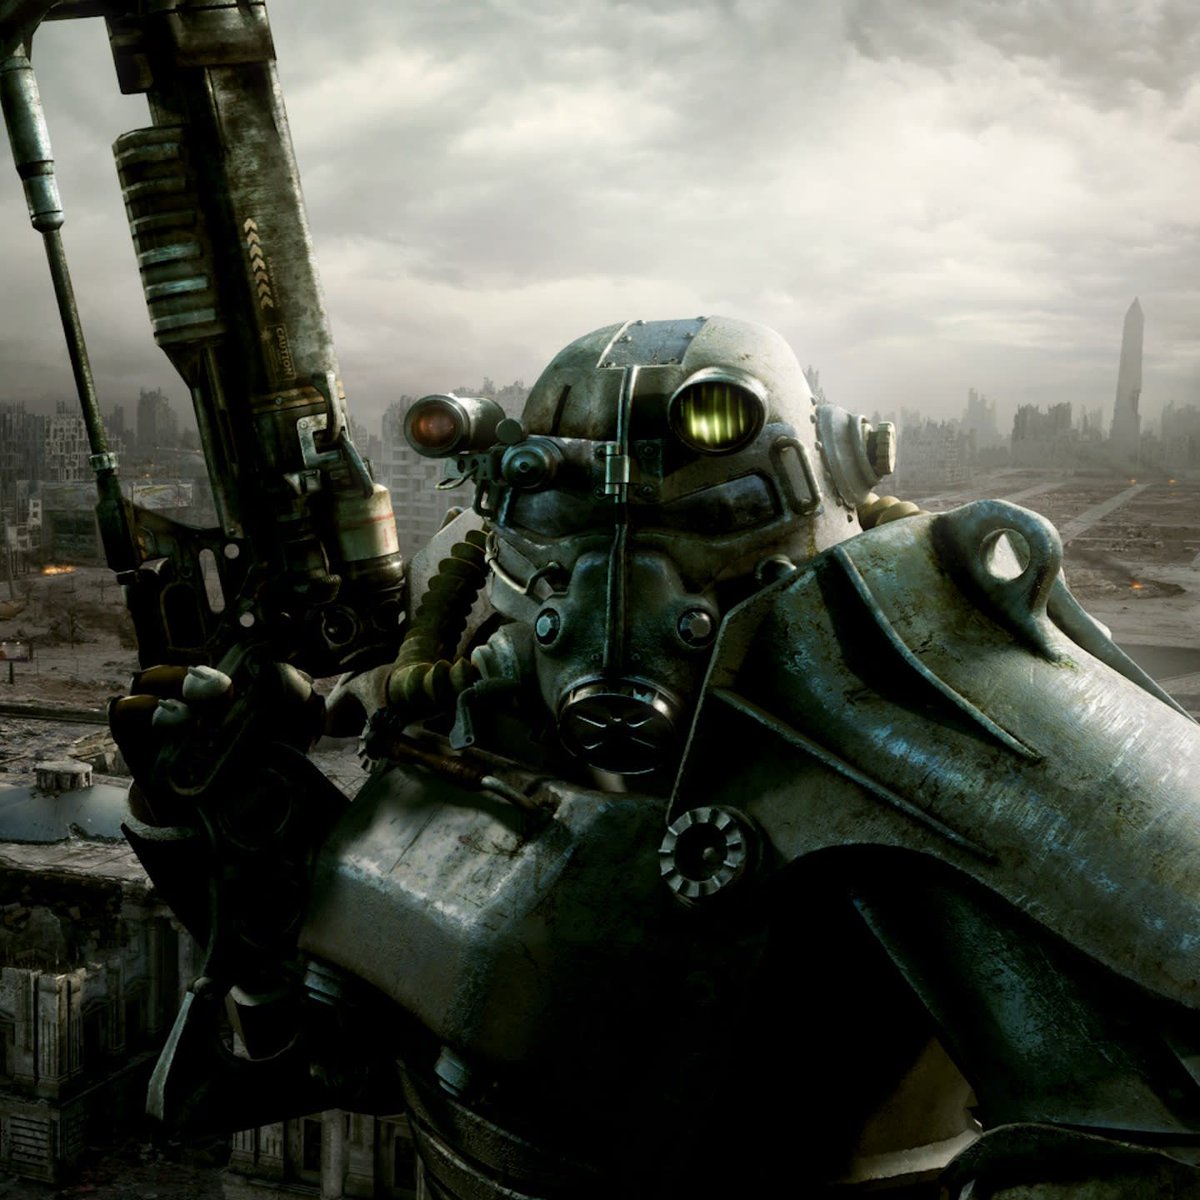 Data miners have uncovered a potential #CallOfDuty and #Fallout crossover 🎮

(via @CODWarfareForum)